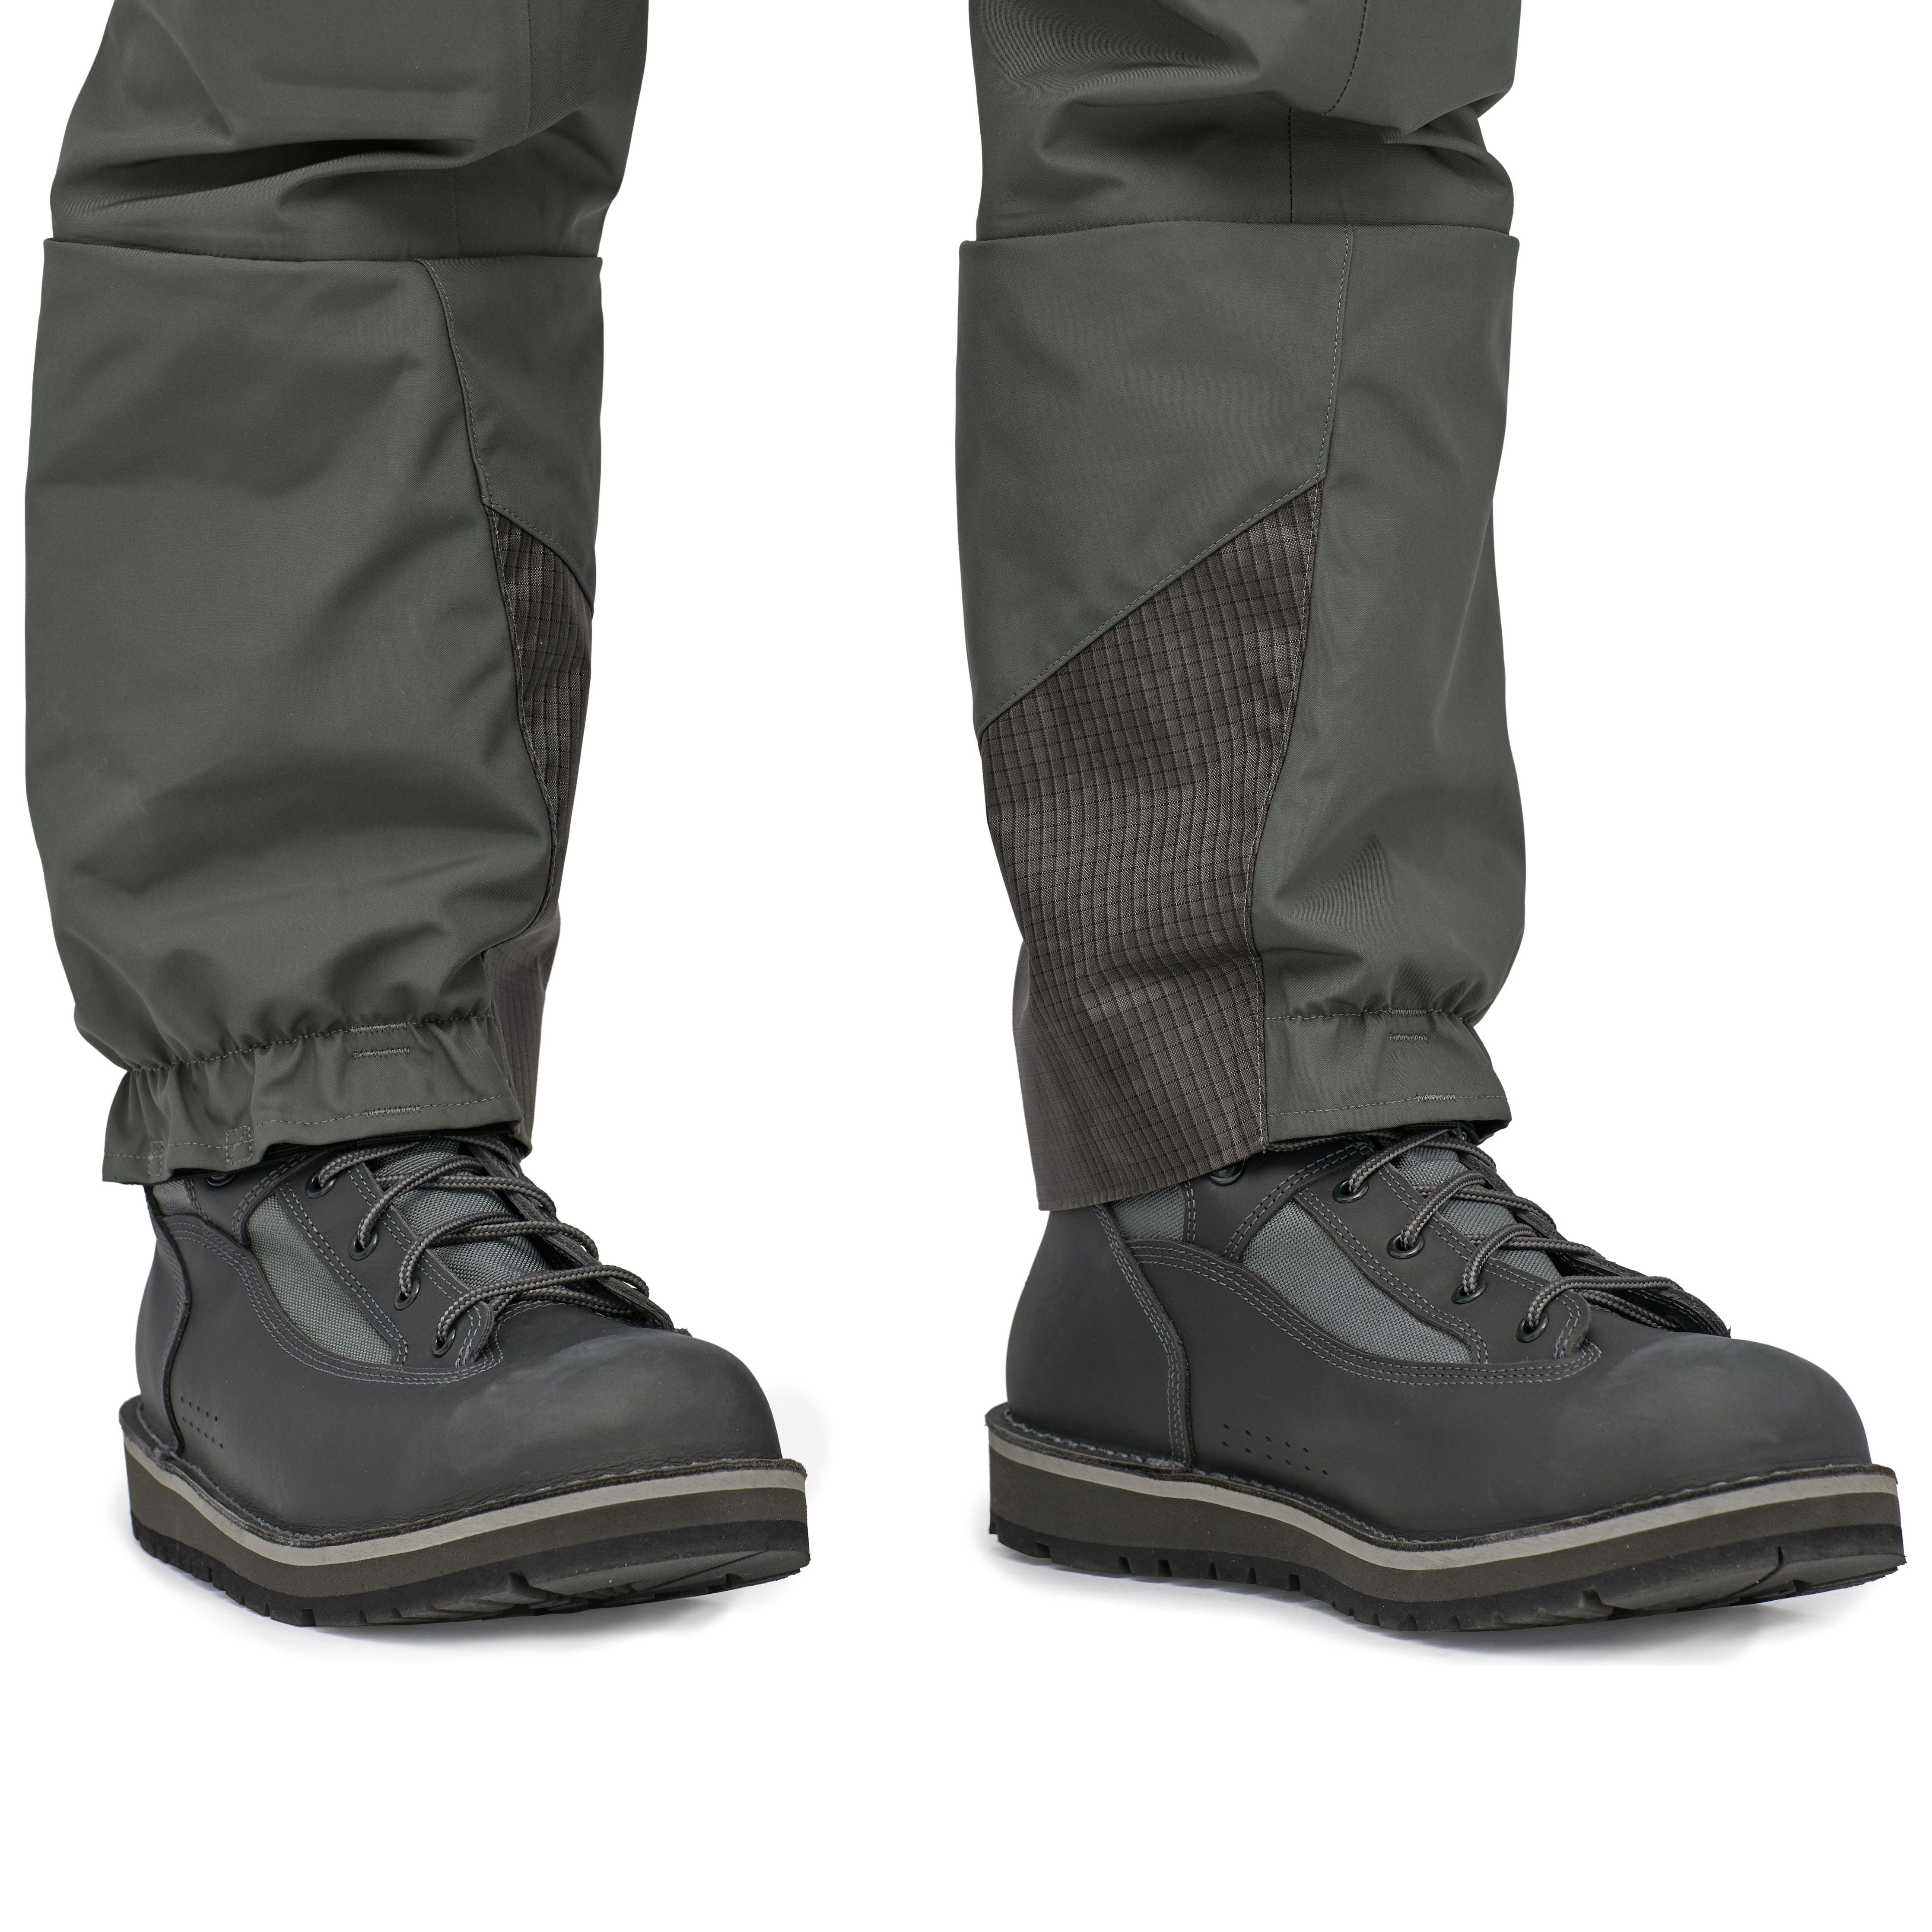 Patagonia Men's Swiftcurrent Expedition Waders Forge Grey Image 06